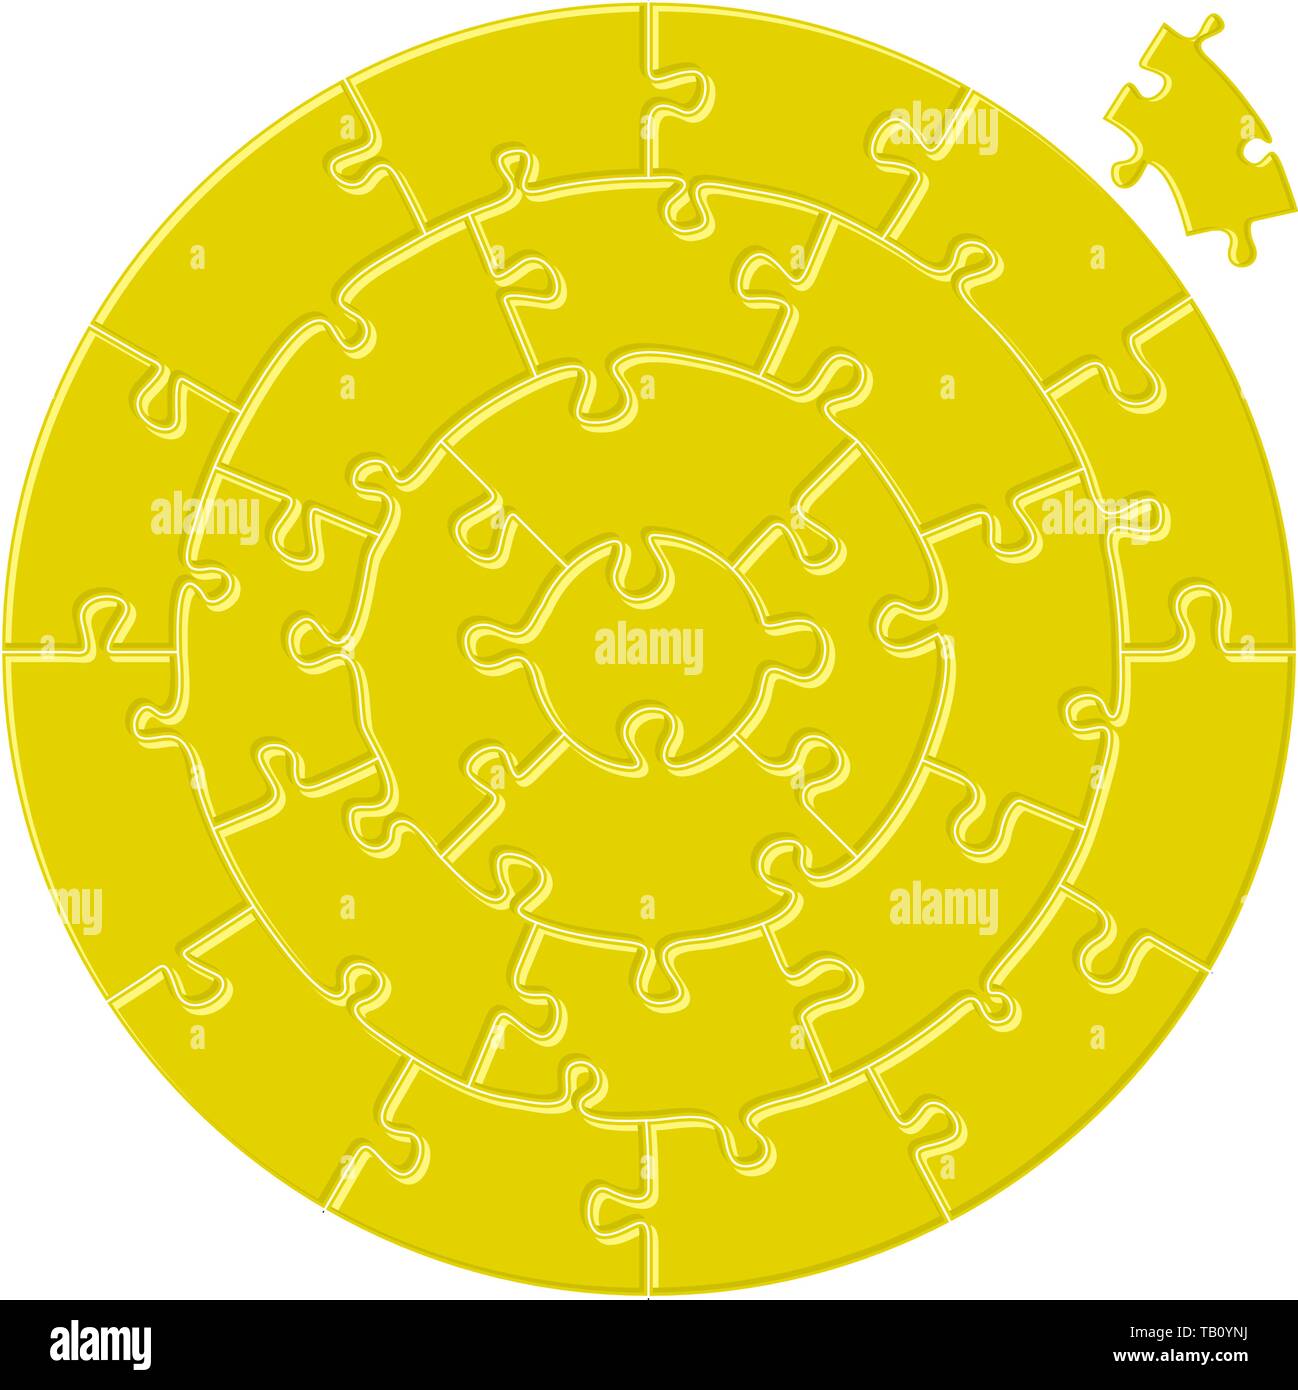 Vector illustration. Circular simple puzzle in yellow. Four concentric circles. Stock Vector